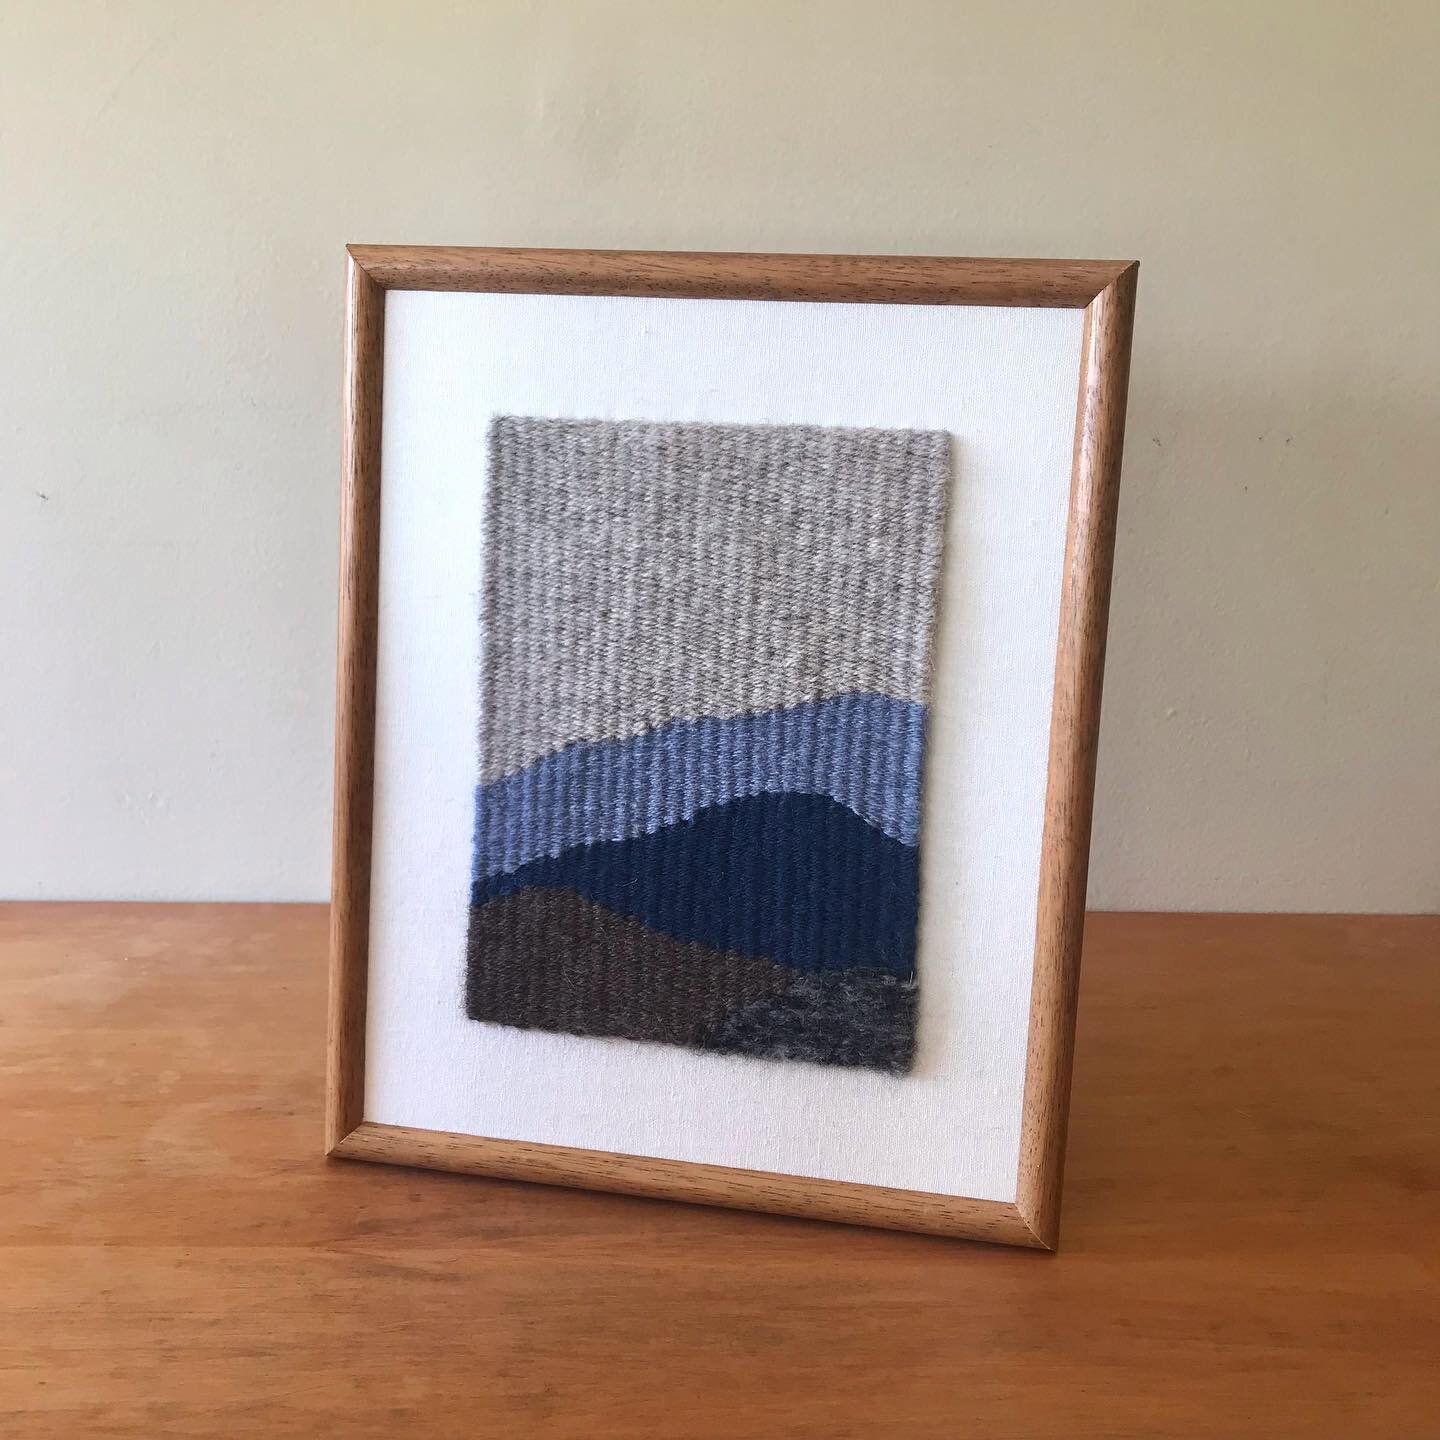 Blue Mountains. 22.5 x 27.5cm, wool and cotton in a wood frame. $50 plus postage. DM if you&rsquo;d like to make this yours ✨All profits from the piece will go to an Aotearoa women&rsquo;s charity.